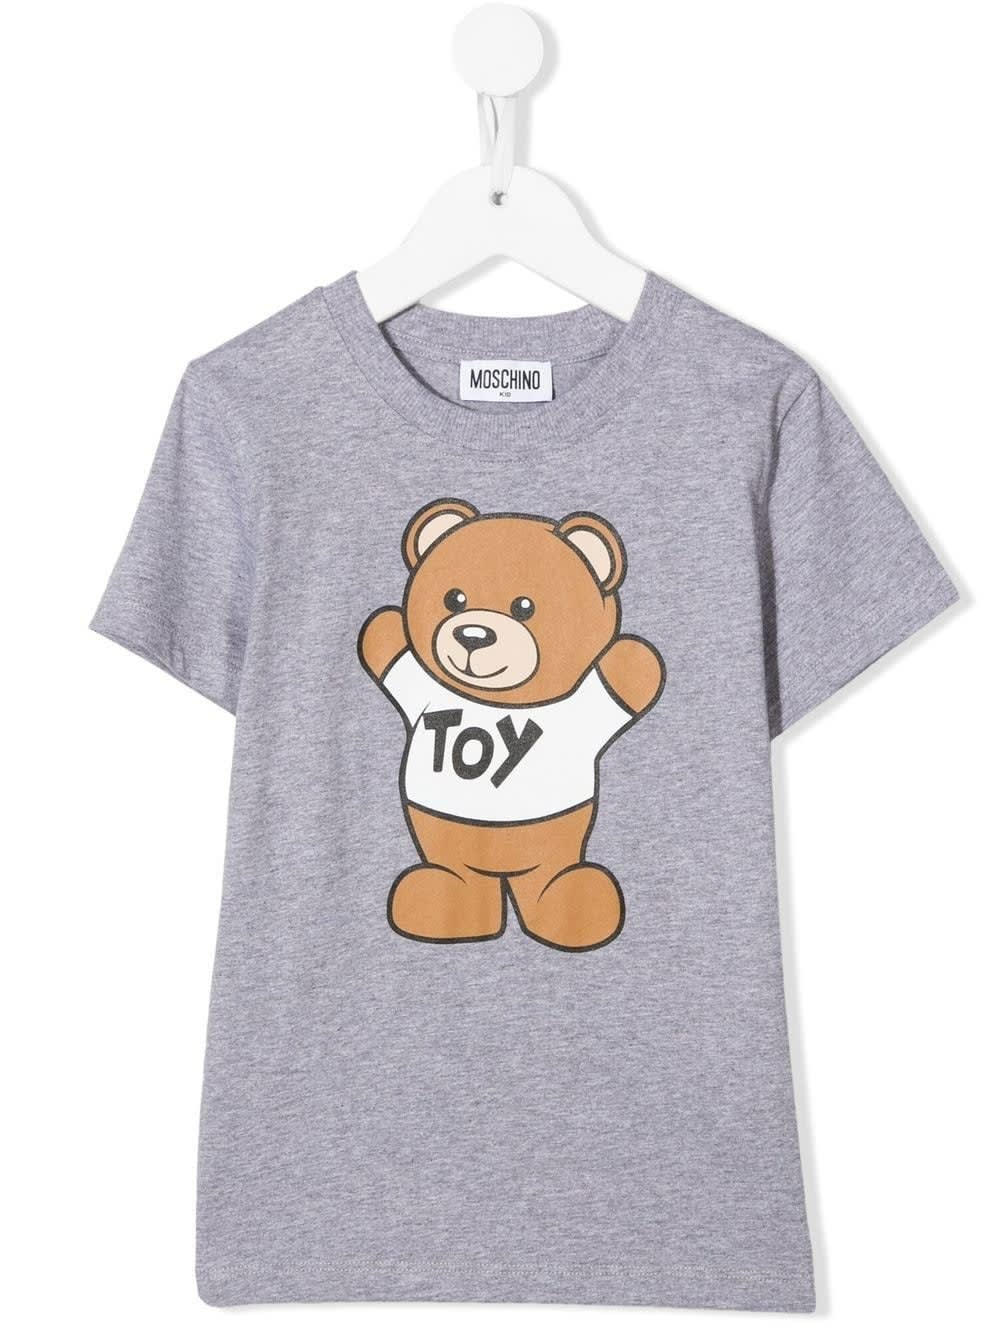 Kids Grey T-shirt With Front And Back Moschino Teddy Bear Print